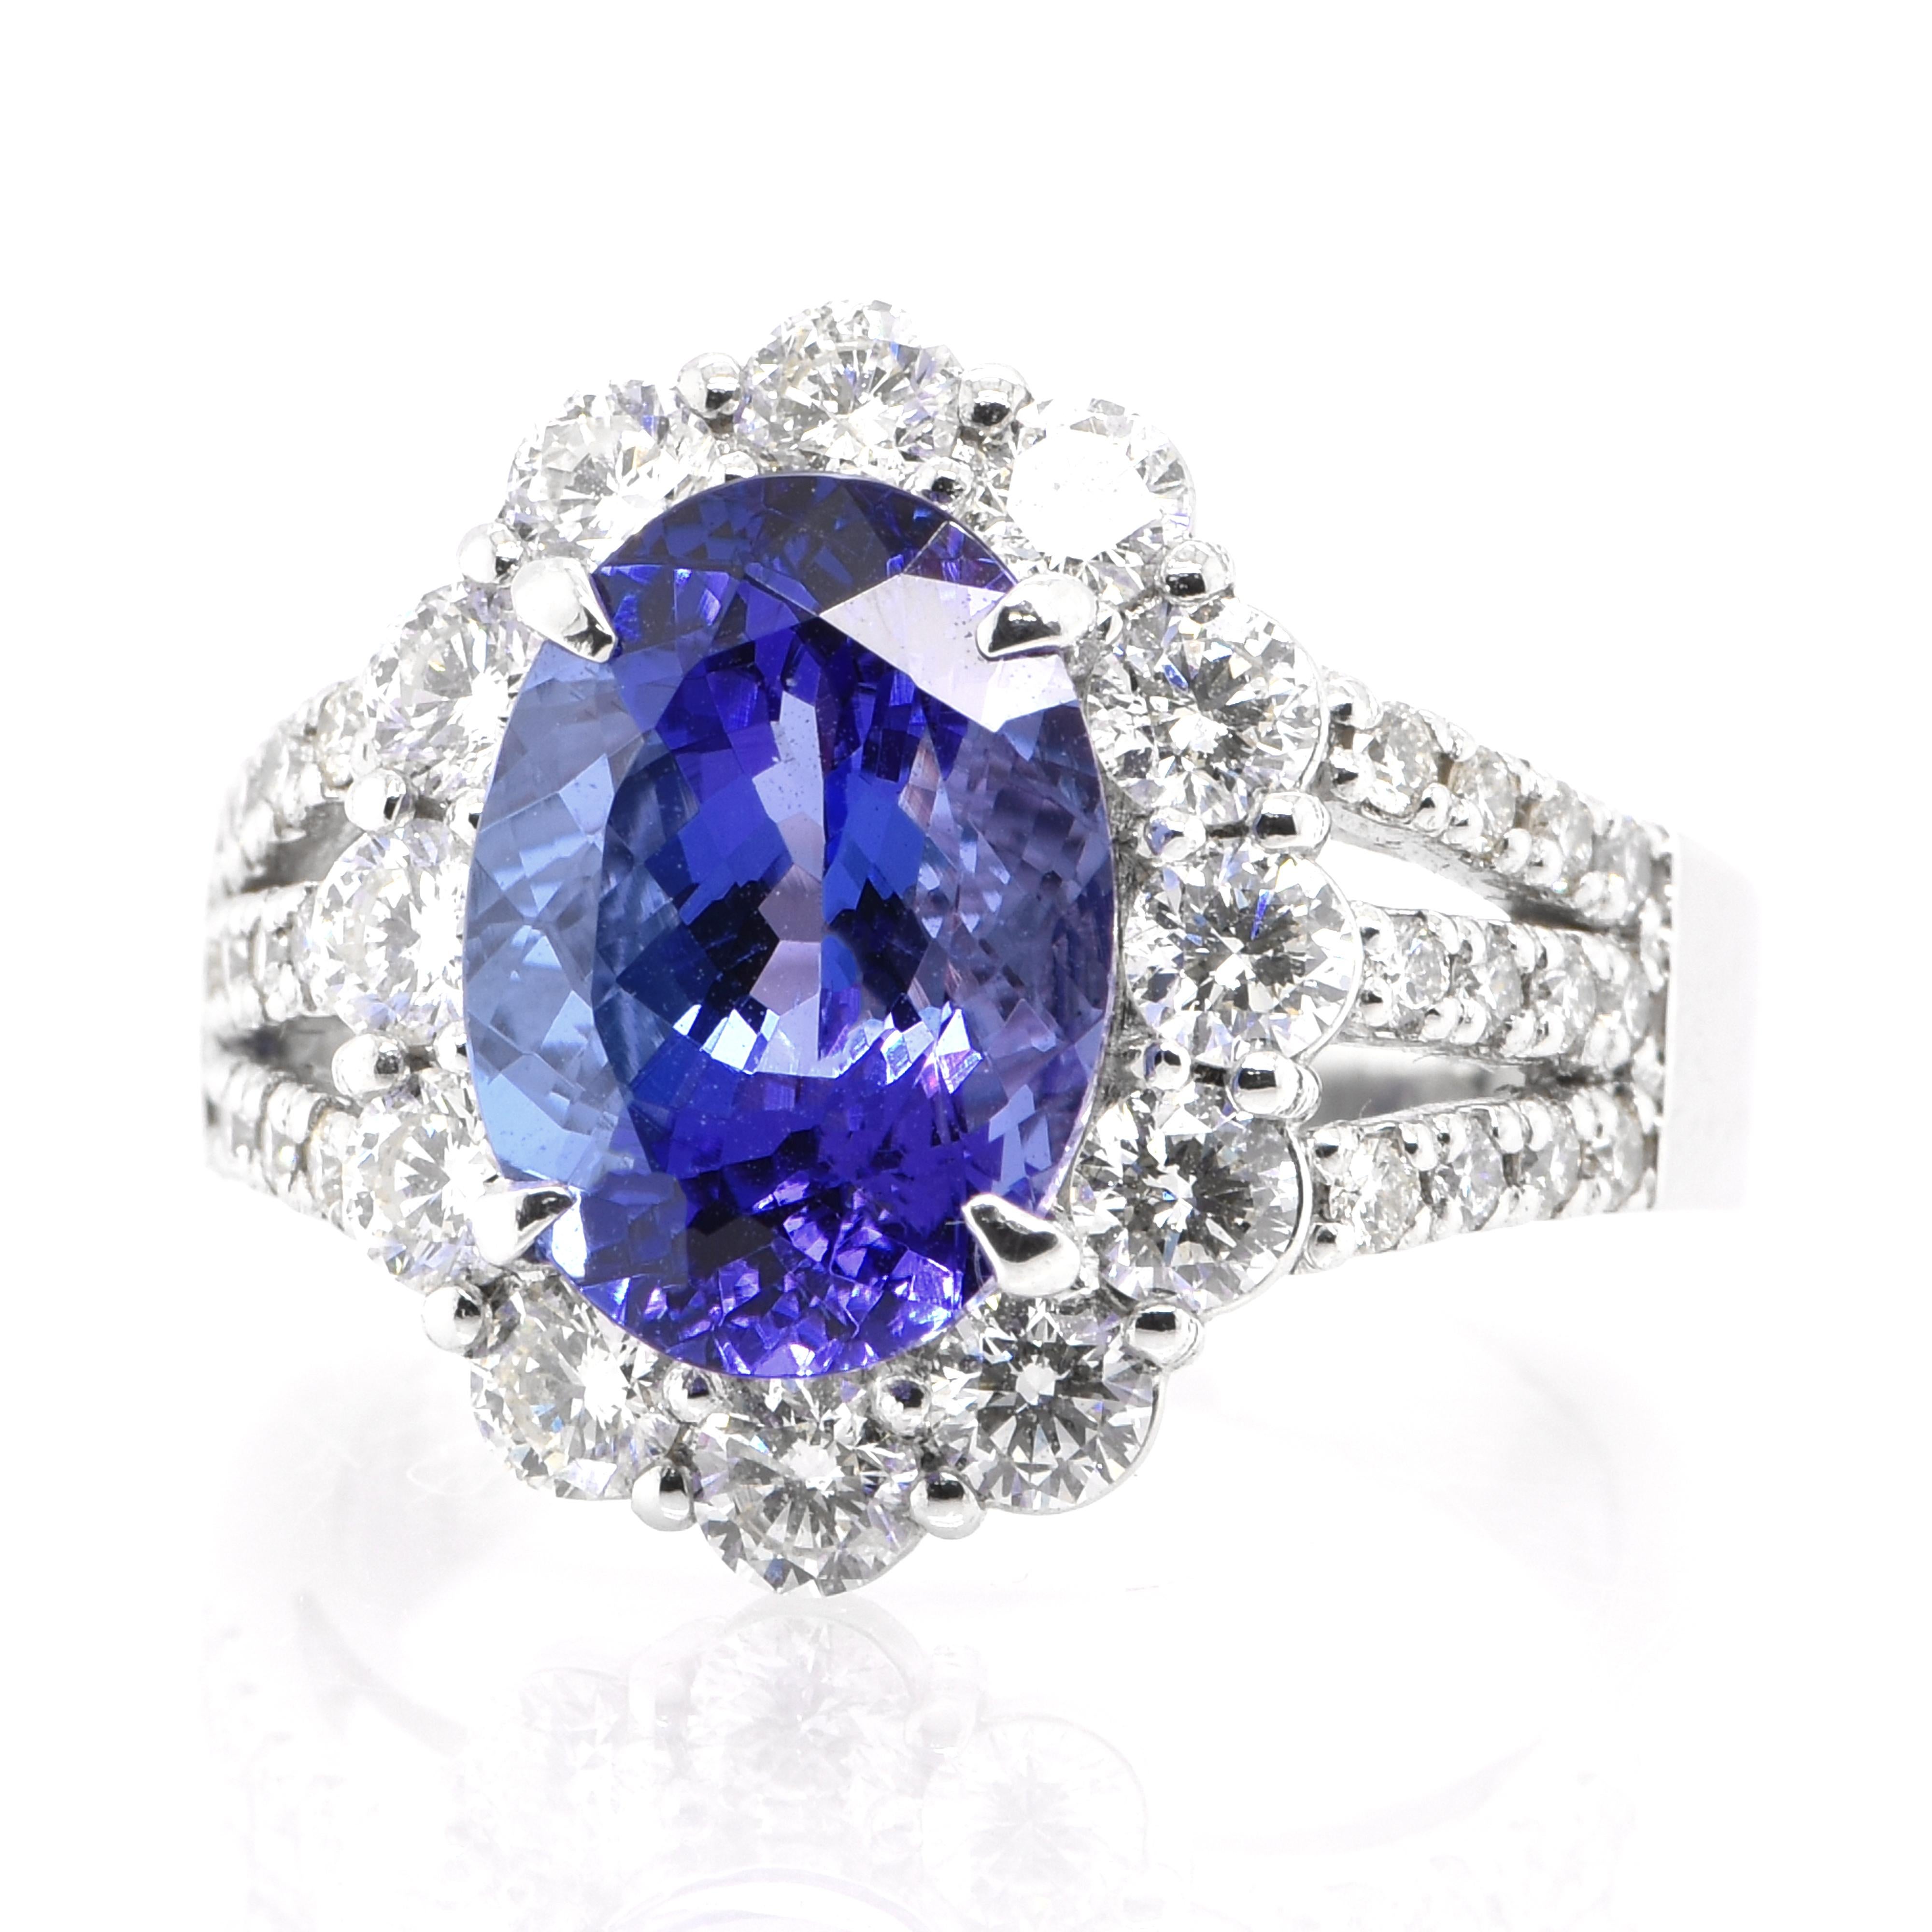 A beautiful Cocktail Ring featuring a 4.67 Carat Natural Tanzanite and 1.48 Carats of Diamond Accents set in Platinum. Tanzanite's name was given by Tiffany and Co after its only known source: Tanzania. Tanzanite displays beautiful pleochroic colors